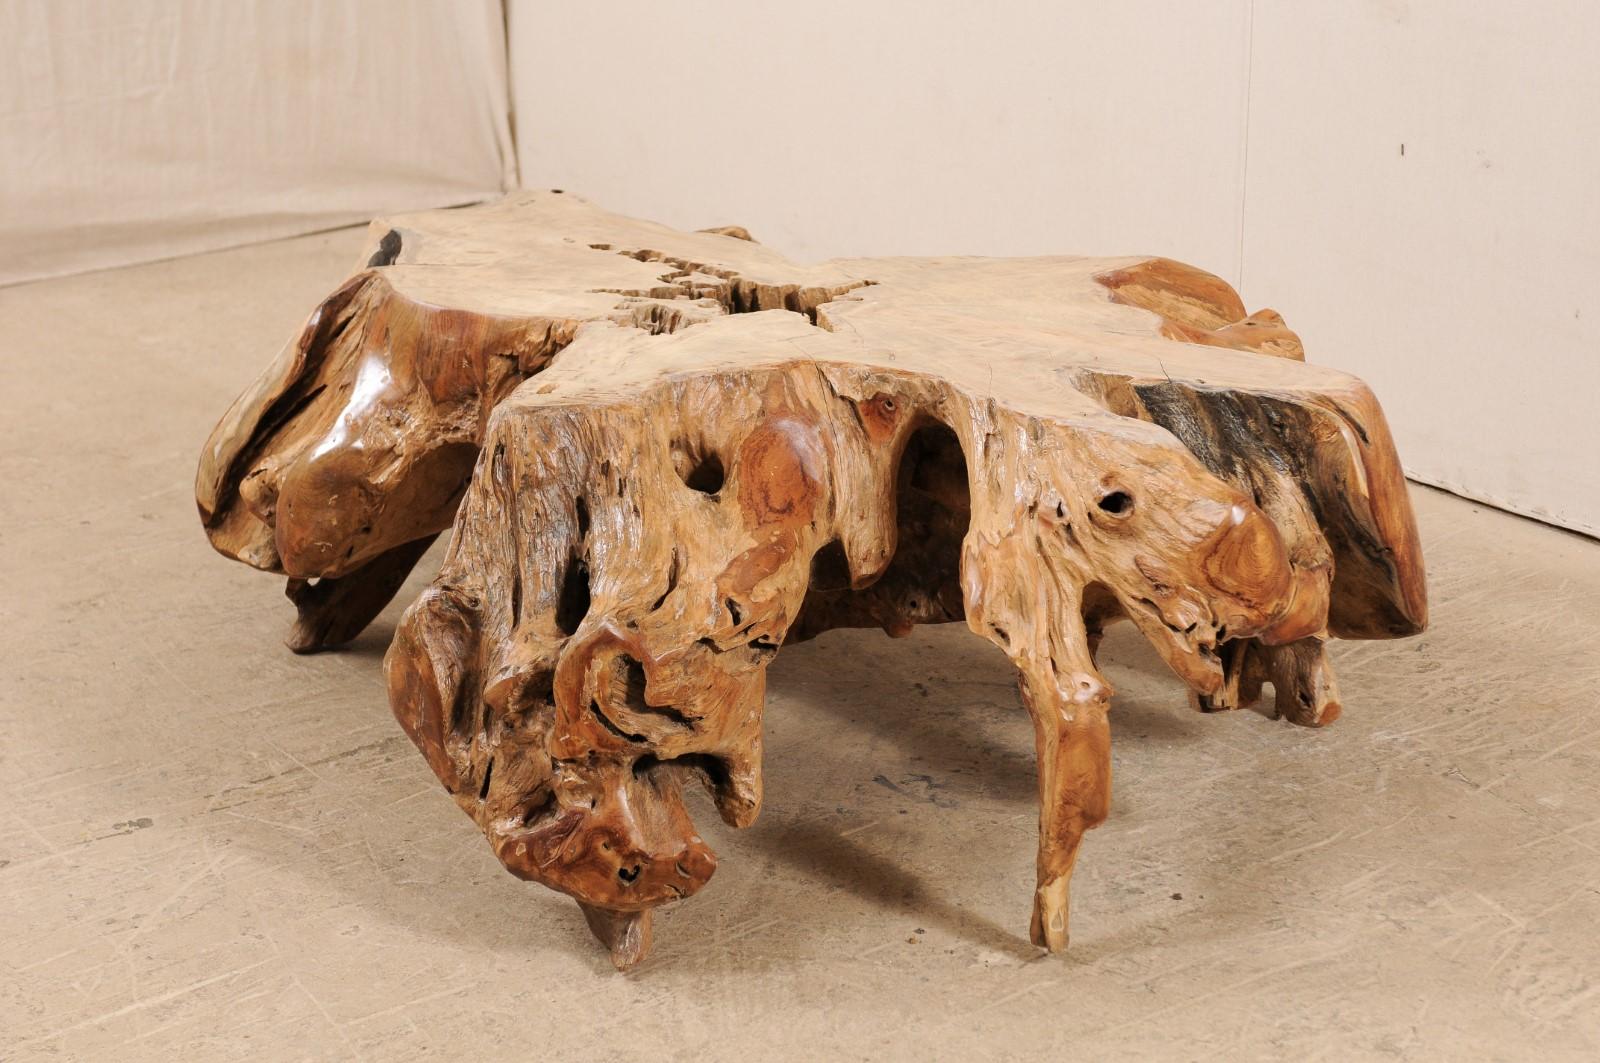 A natural teak tree root coffee table. This wooden coffee table has been fashioned from a large cut section of old teak stump, whose intertwining roots which gives it an organic and airy feel. There is a nice contrast of colors and wonderful showing